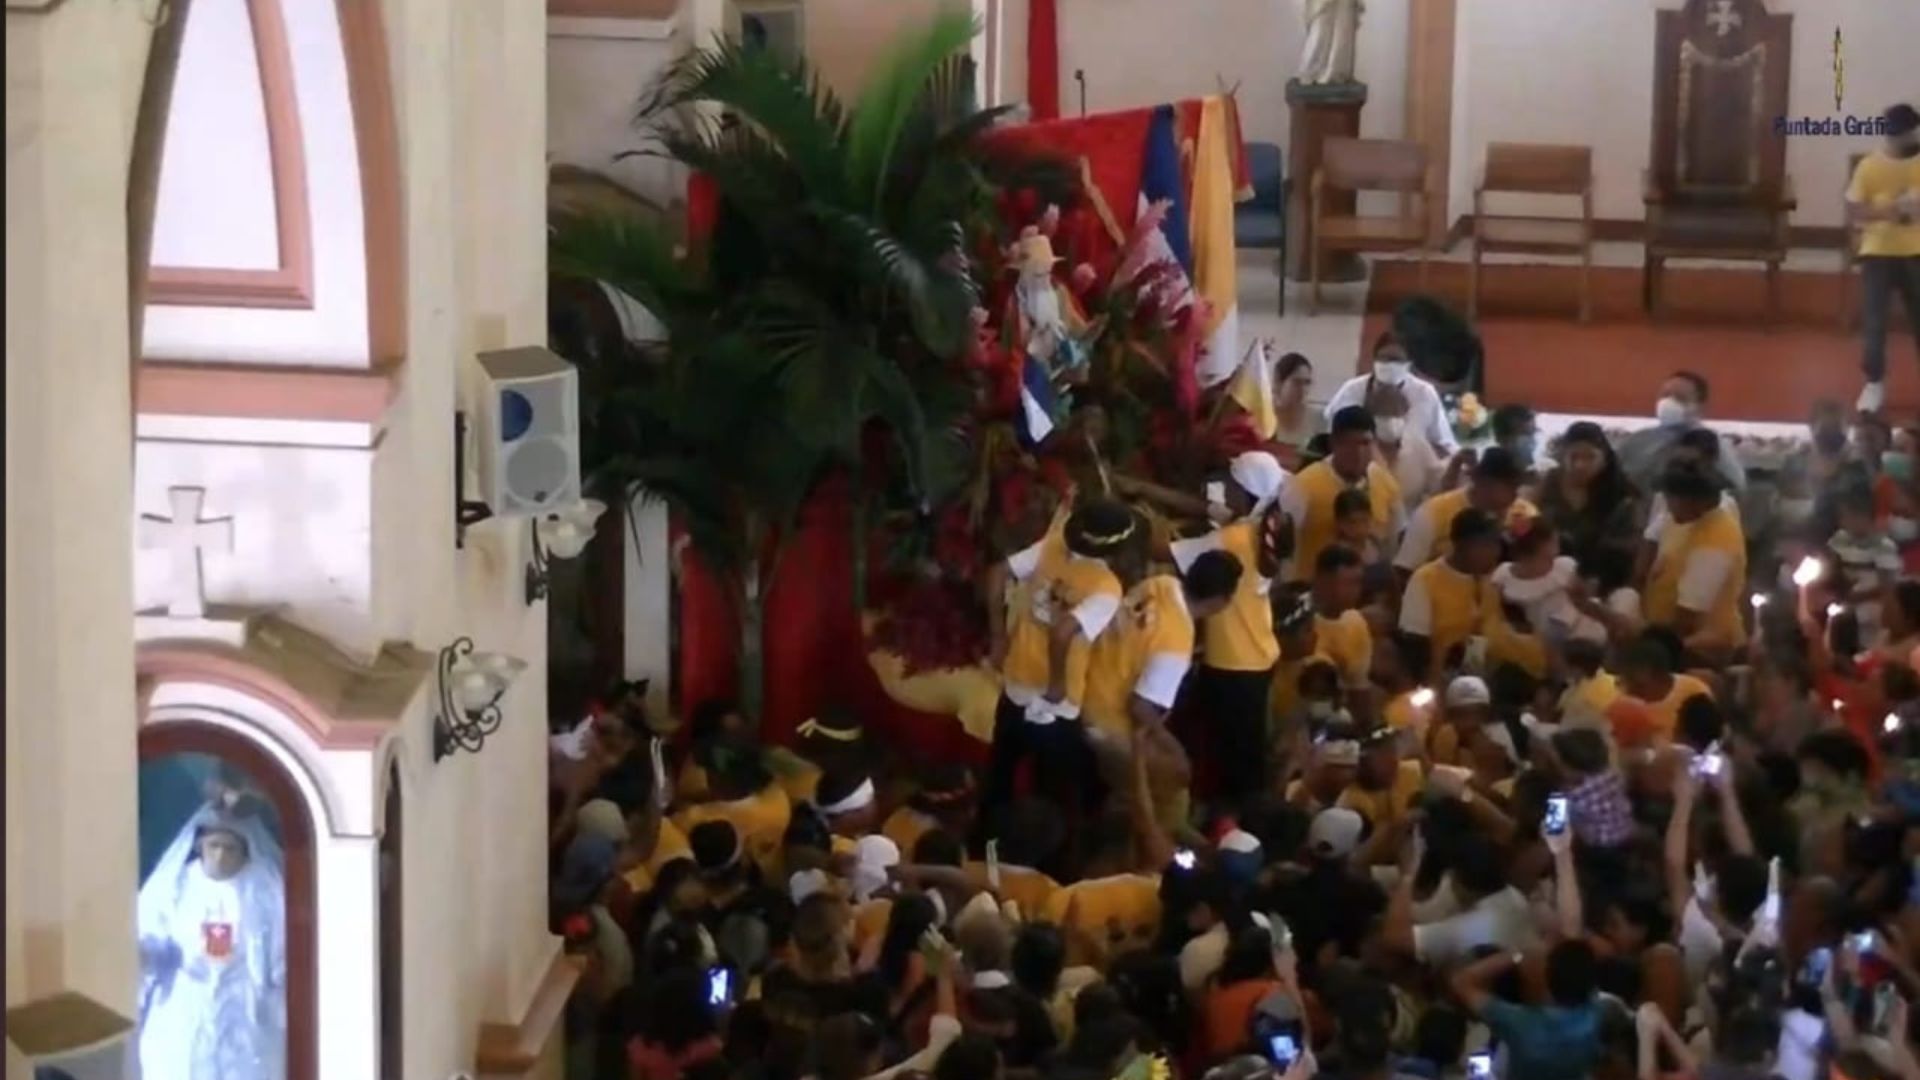 San Jerónimo remains locked in his church, but parishioners pack the temple